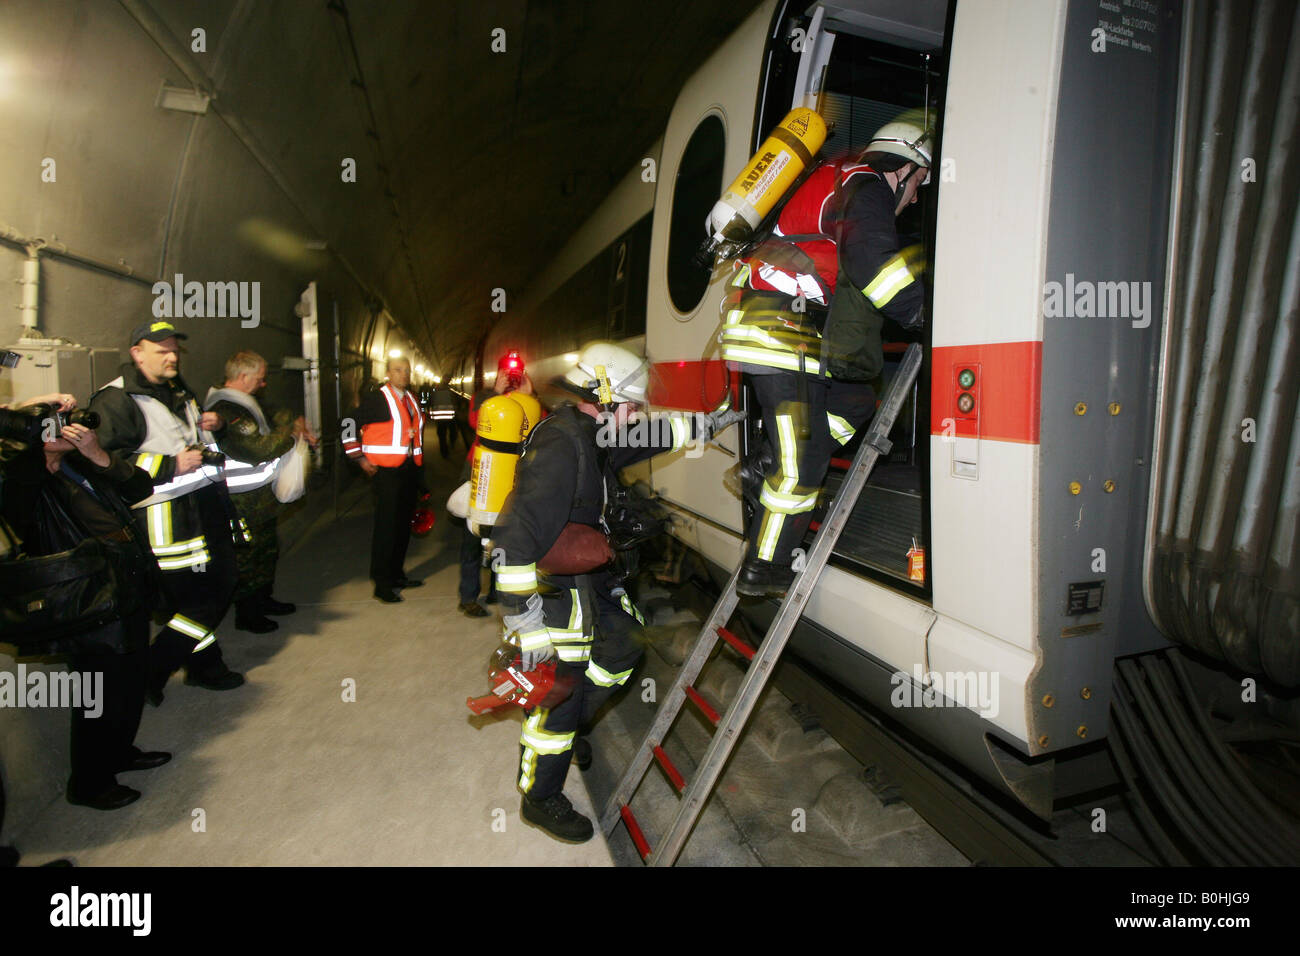 Firefighters, rescue drill conducted in an ICE high-speed or bullet train tunnel, Germany Stock Photo